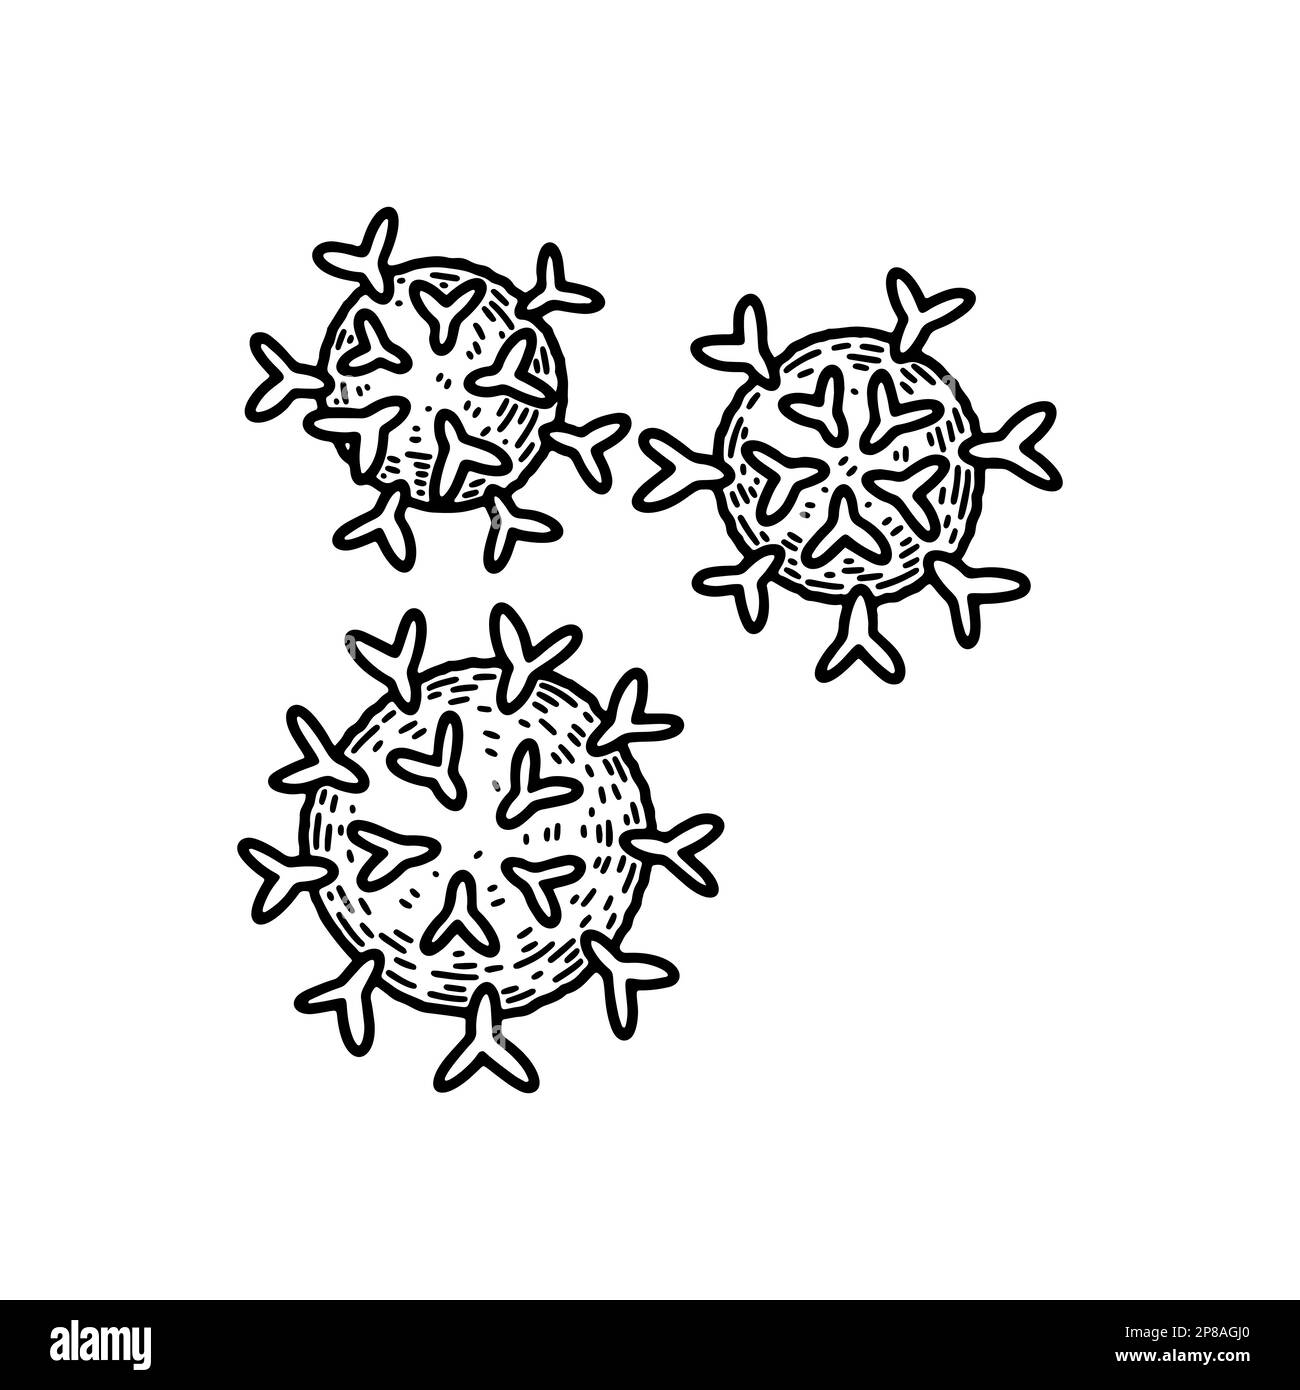 B-cells isolated on white background. Hand drawn scientific microbiology vector illustration in sketch style. Adaptive immune system Stock Vector